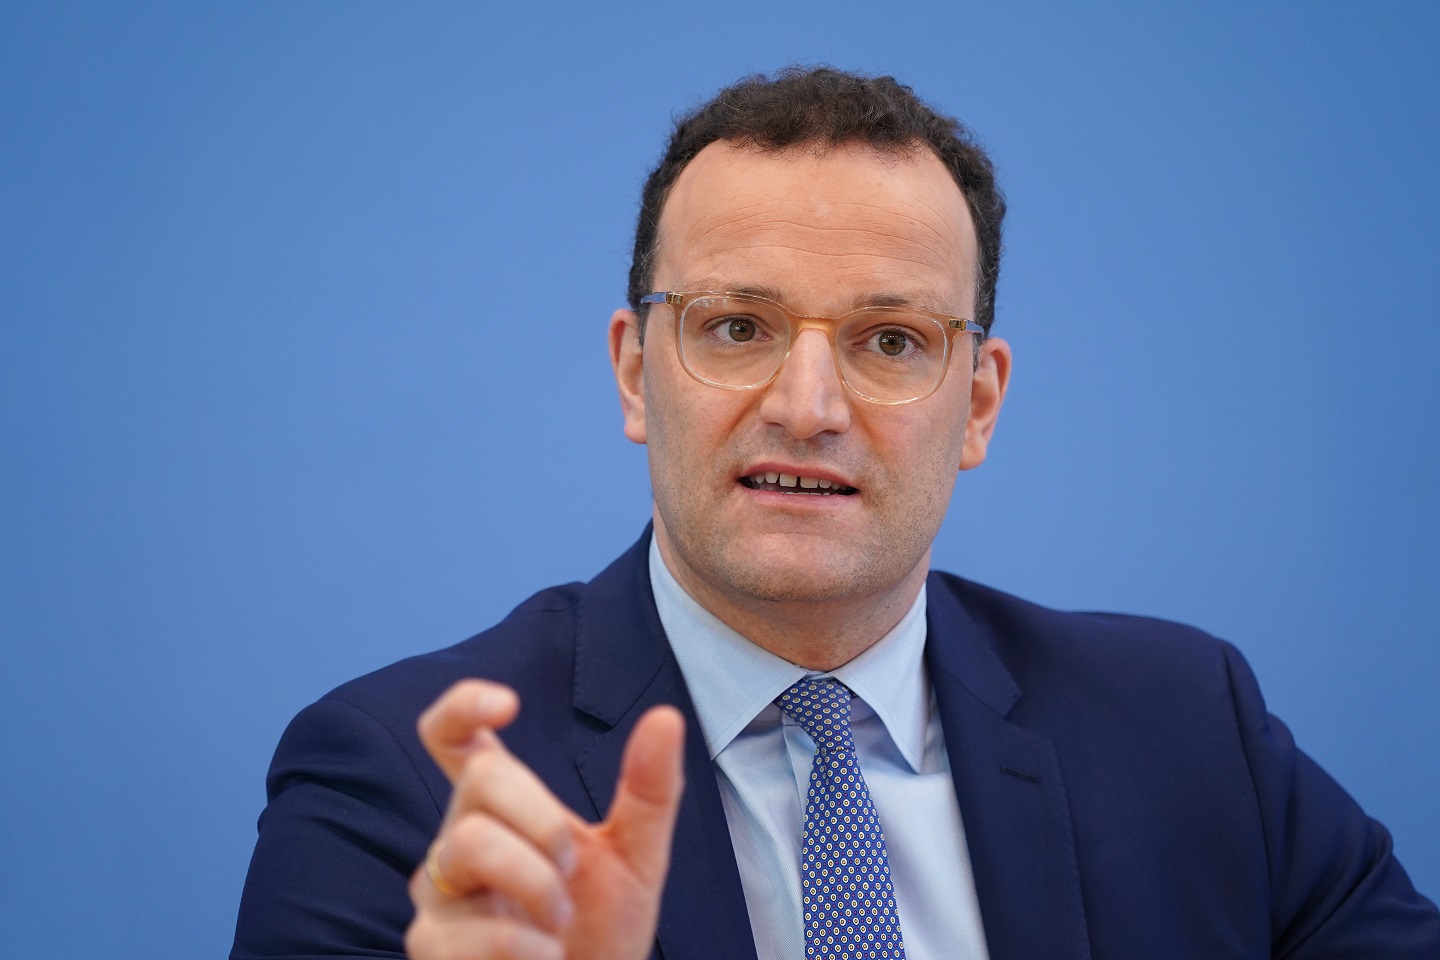 A photograph of German Health Minister Jens Spahn speaking to the media during the coronavirus crisis on April 17, 2020 in Berlin,